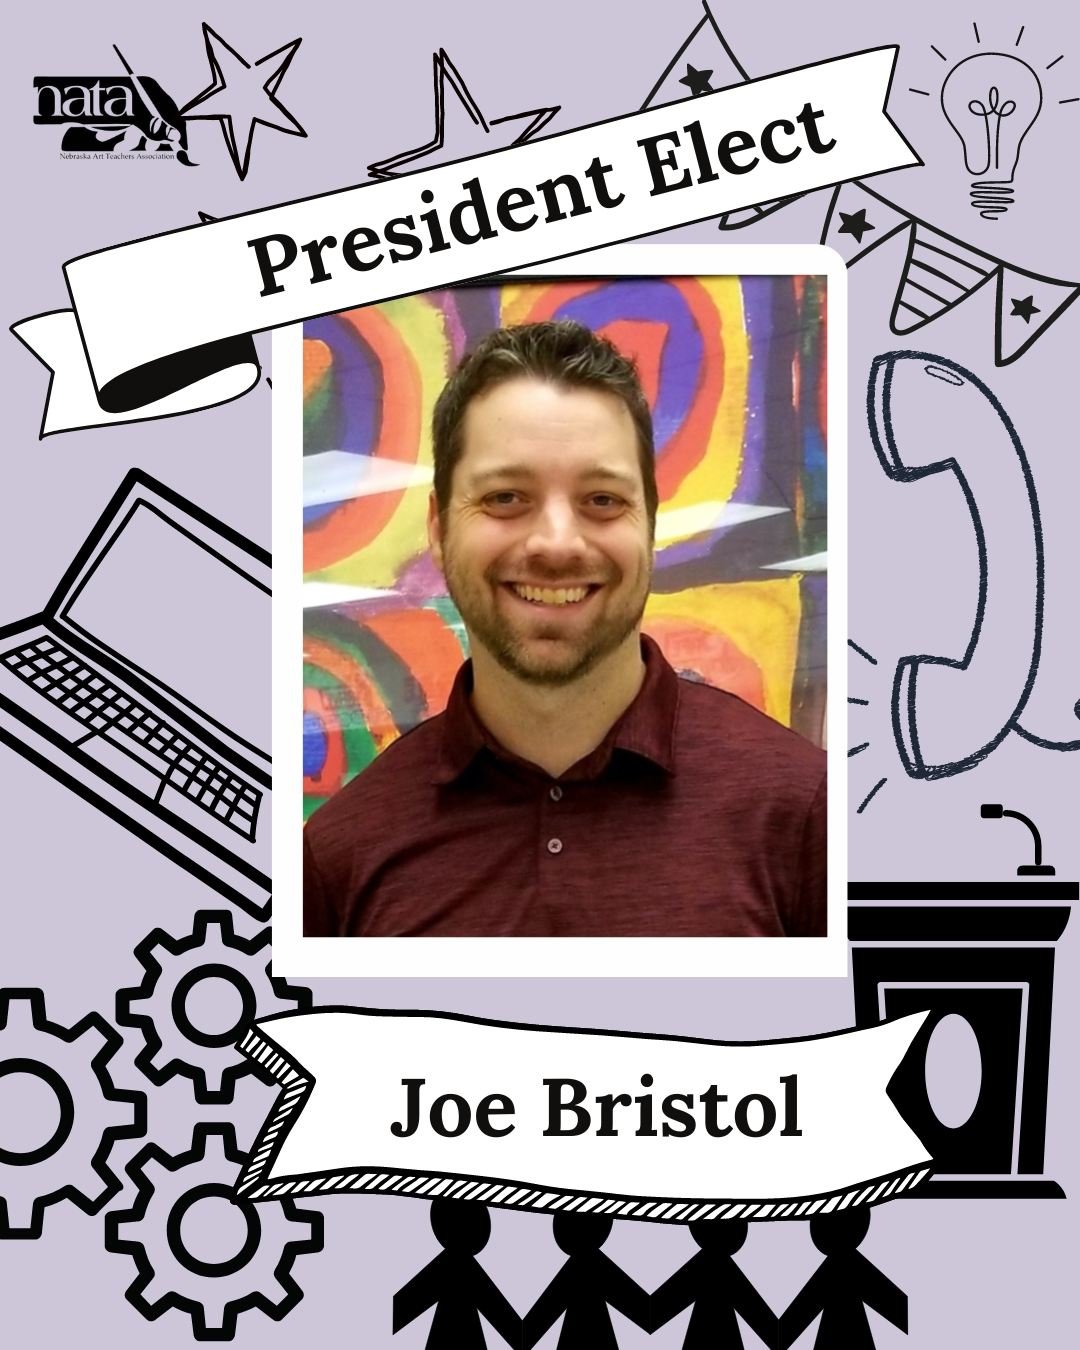 We are excited to be welcoming Joe Bristol as our president elect, serving on the executive committee of our sitting board!

&ldquo;My name is Joe Bristol and I teach art at Wakonda Elementary School in Omaha, NE. I have been a member of NATA since 2